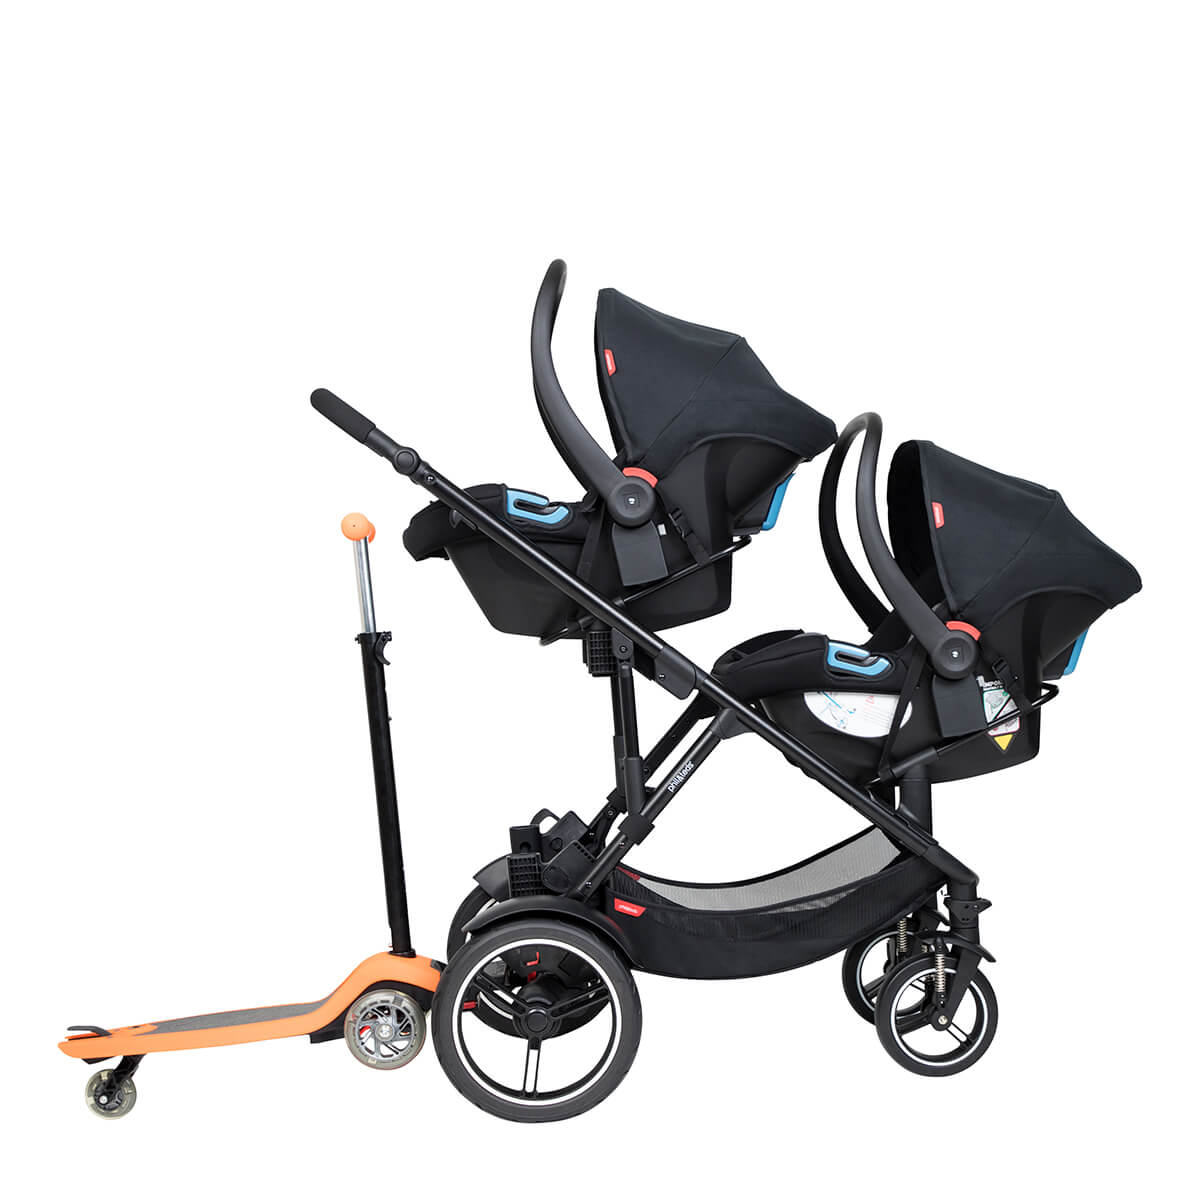 https://cdn.accentuate.io/7266901196853/19119756378165/philteds-voyager-buggy-with-double-travel-systems-and-freerider-stroller-board-in-the-rear-v1700693683980.jpg?1200x1200